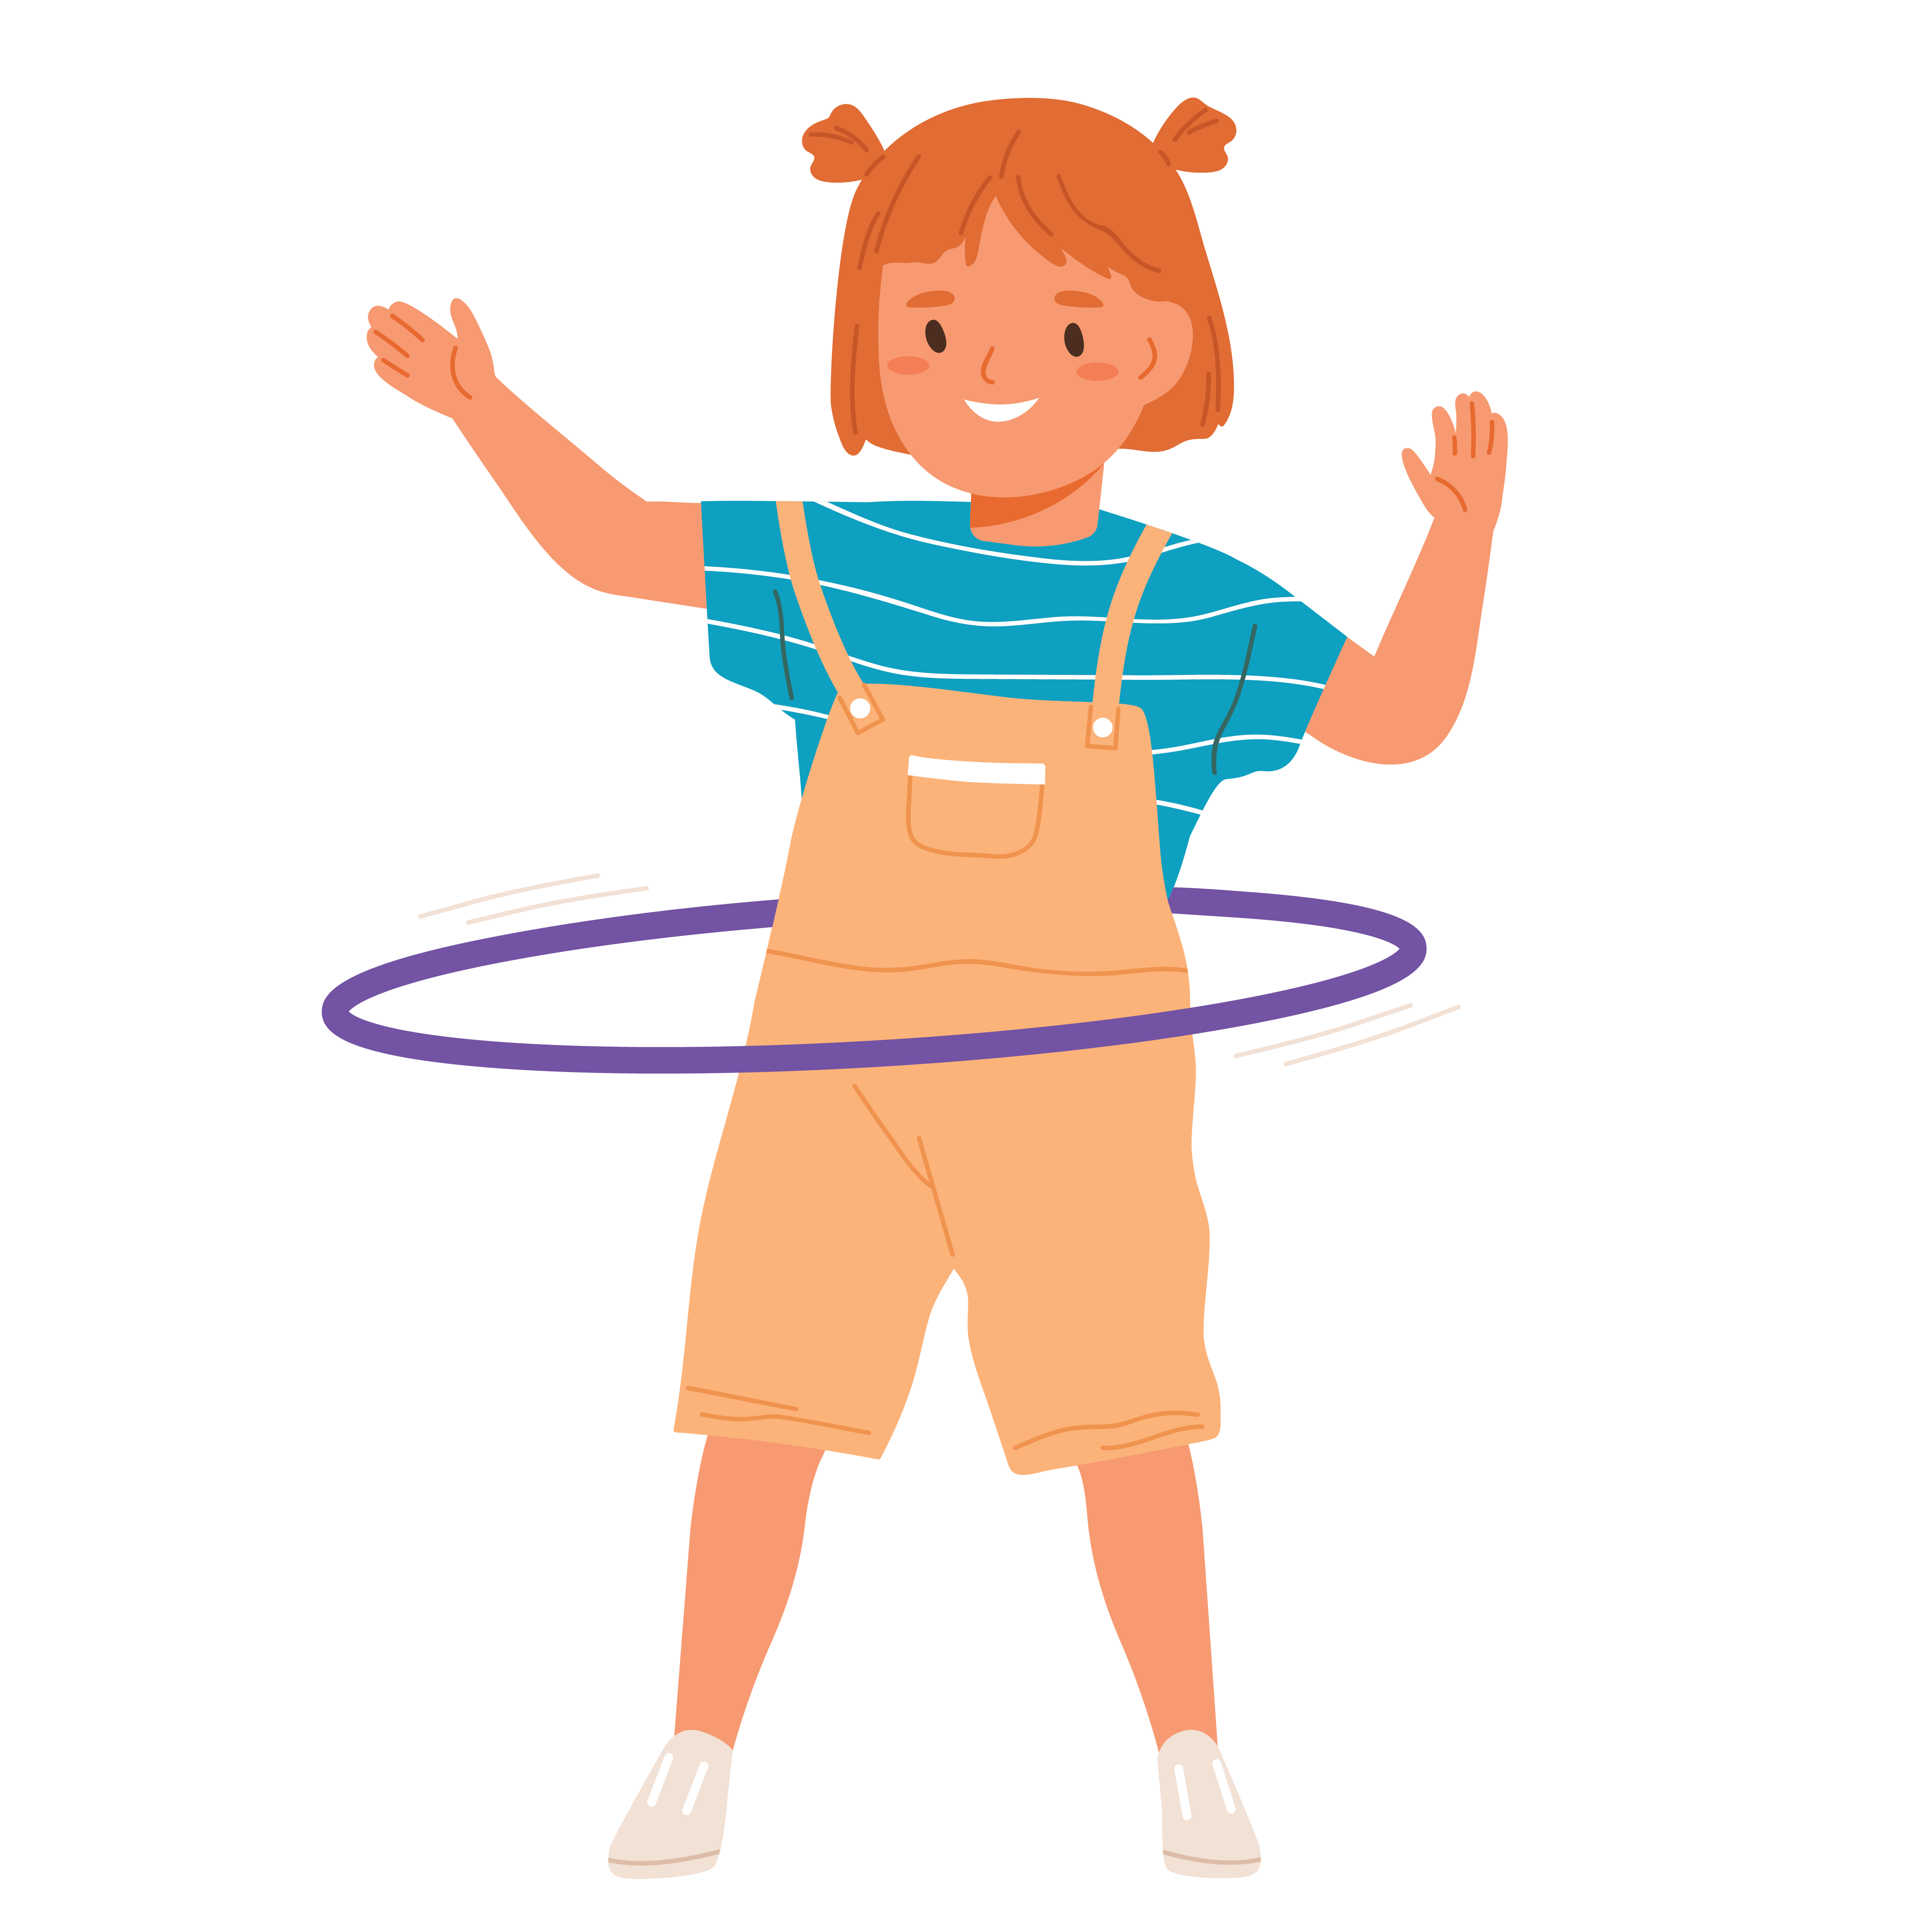 Child playing with hula-hoop